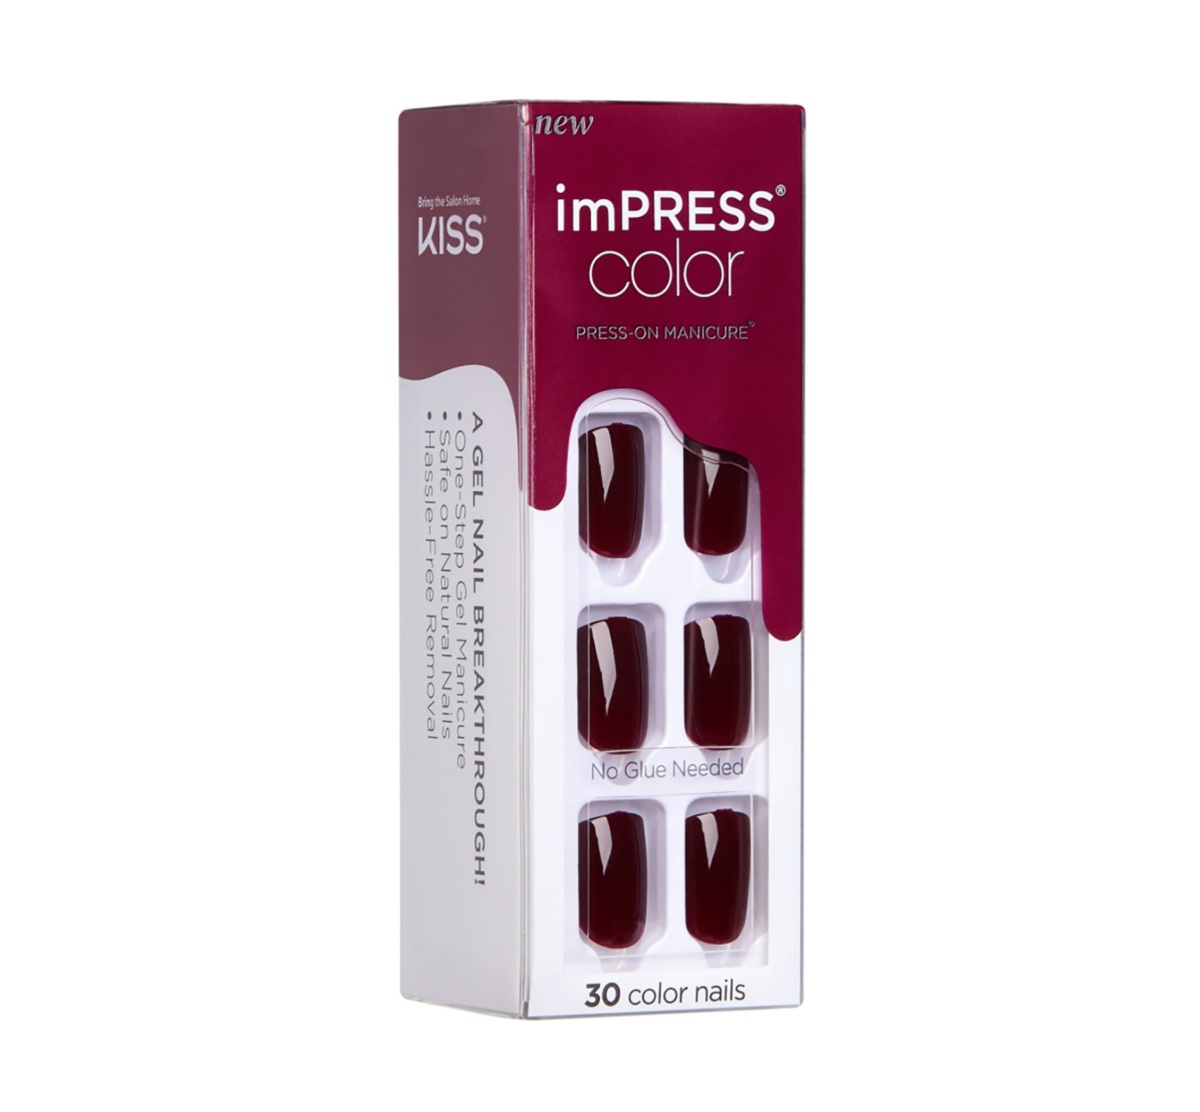 imPRESS Nails review, by beauty blogger What The Fab